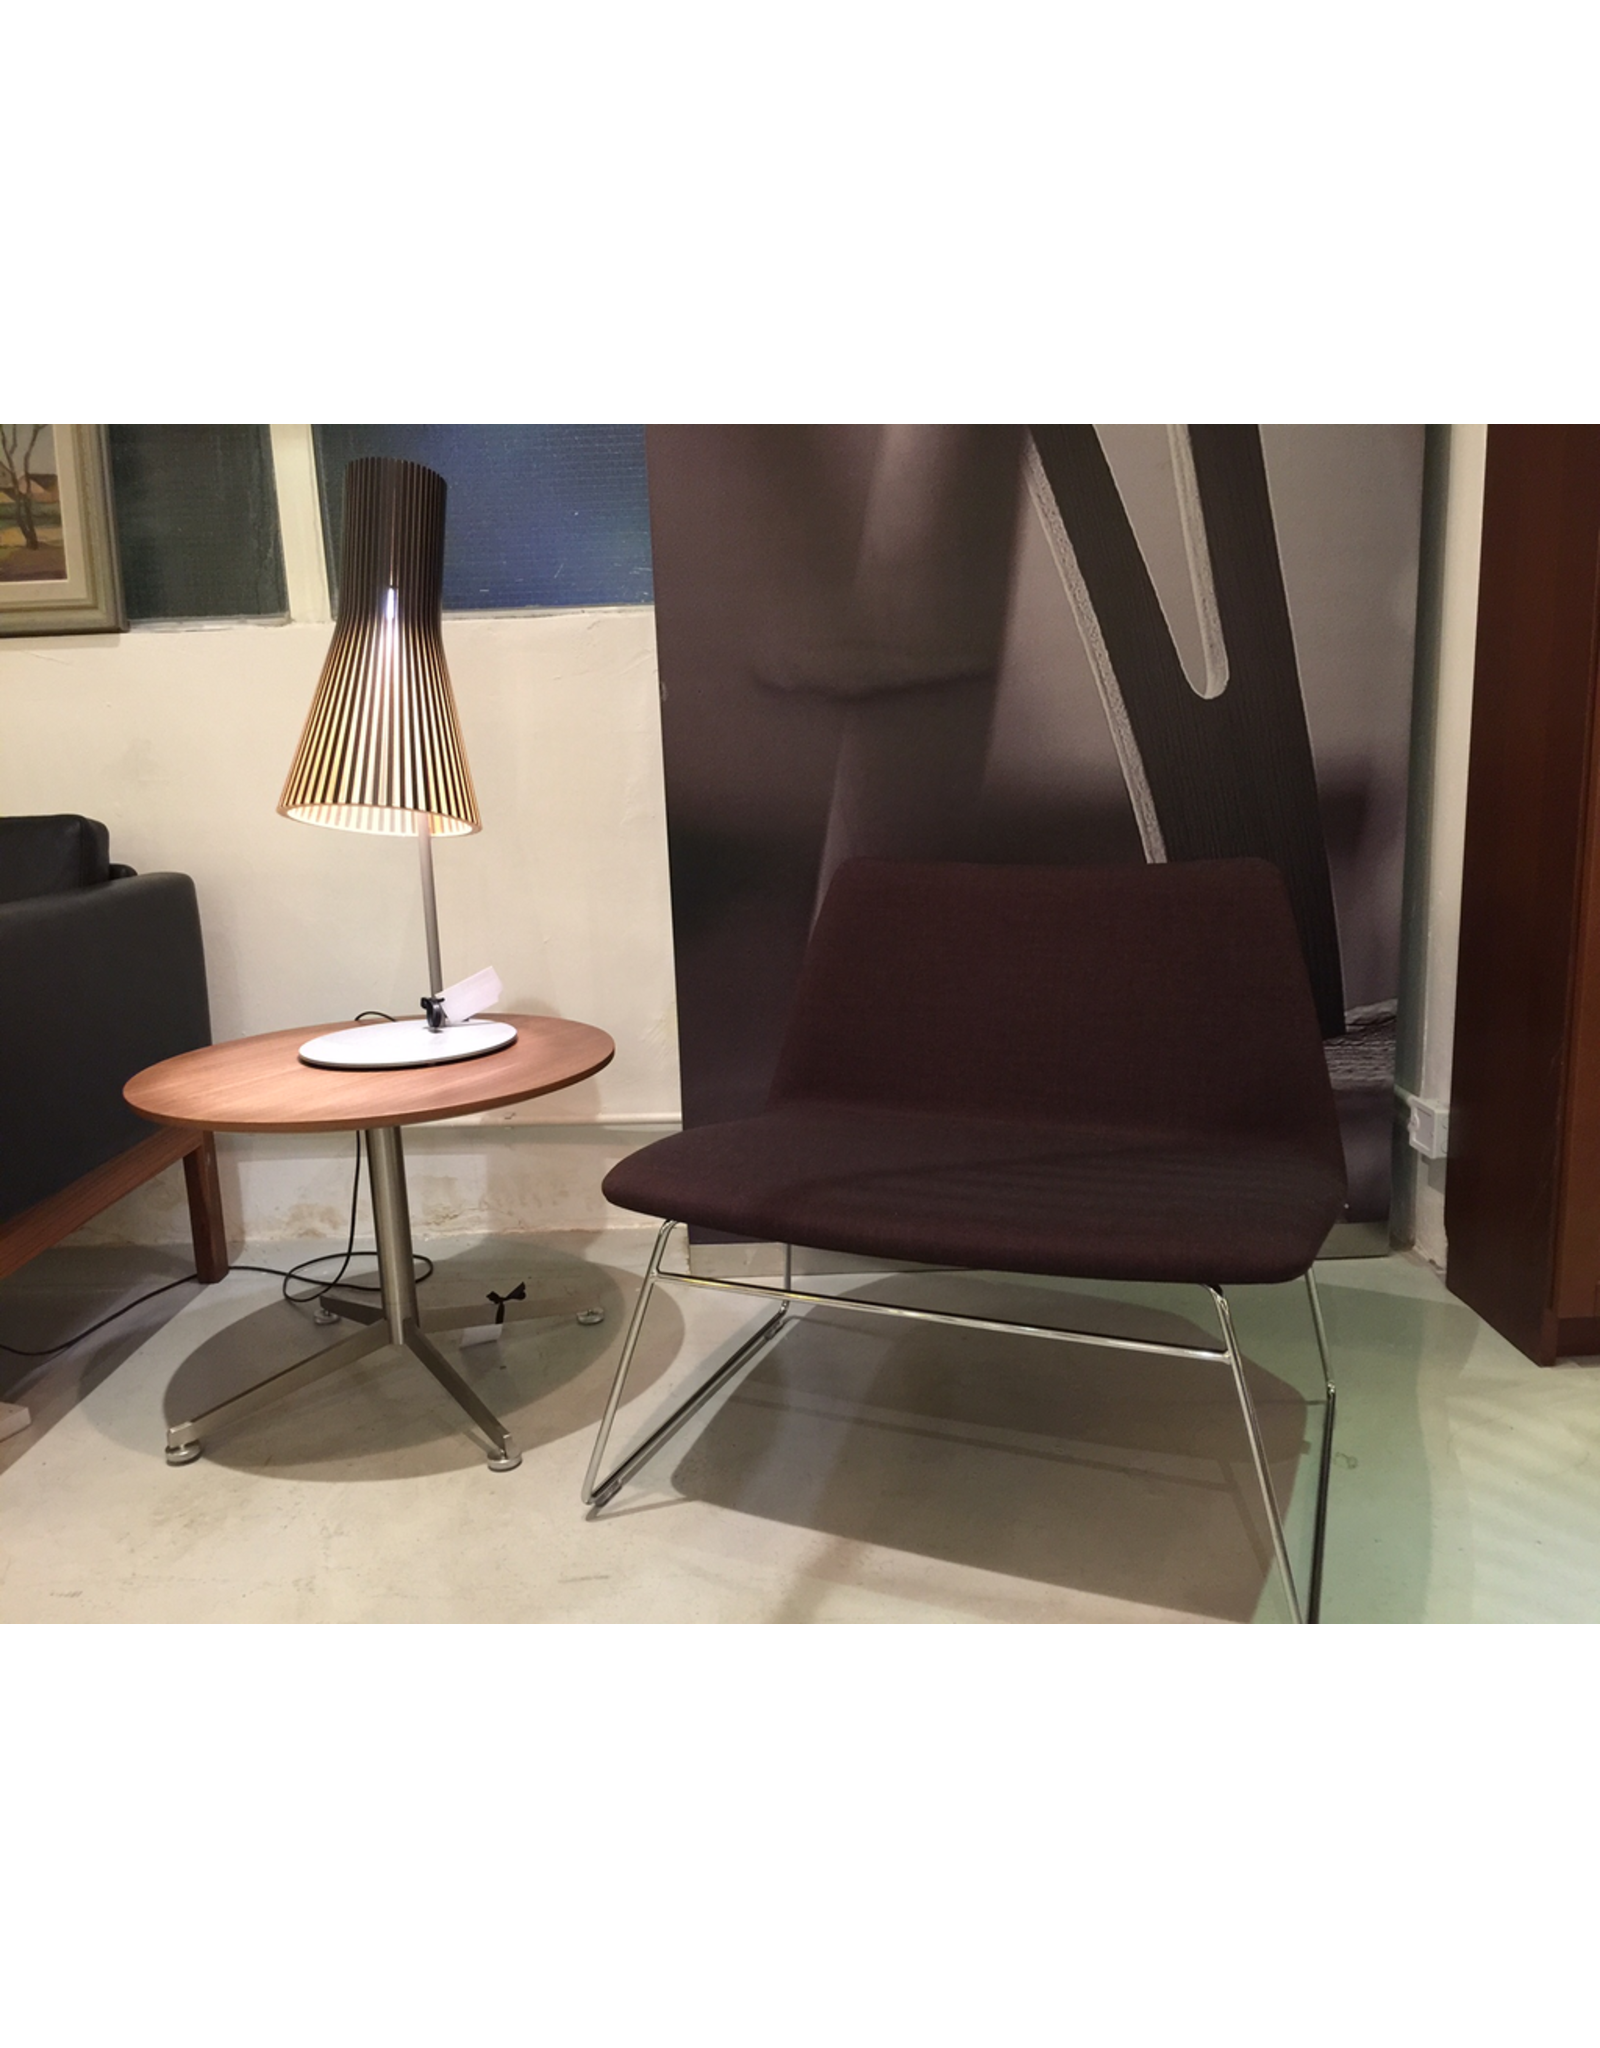 (SHOWROOM ITEM) SPINAL 80 LOUNGE CHAIR, RUNNER LEGS IN POLISHED CHROME